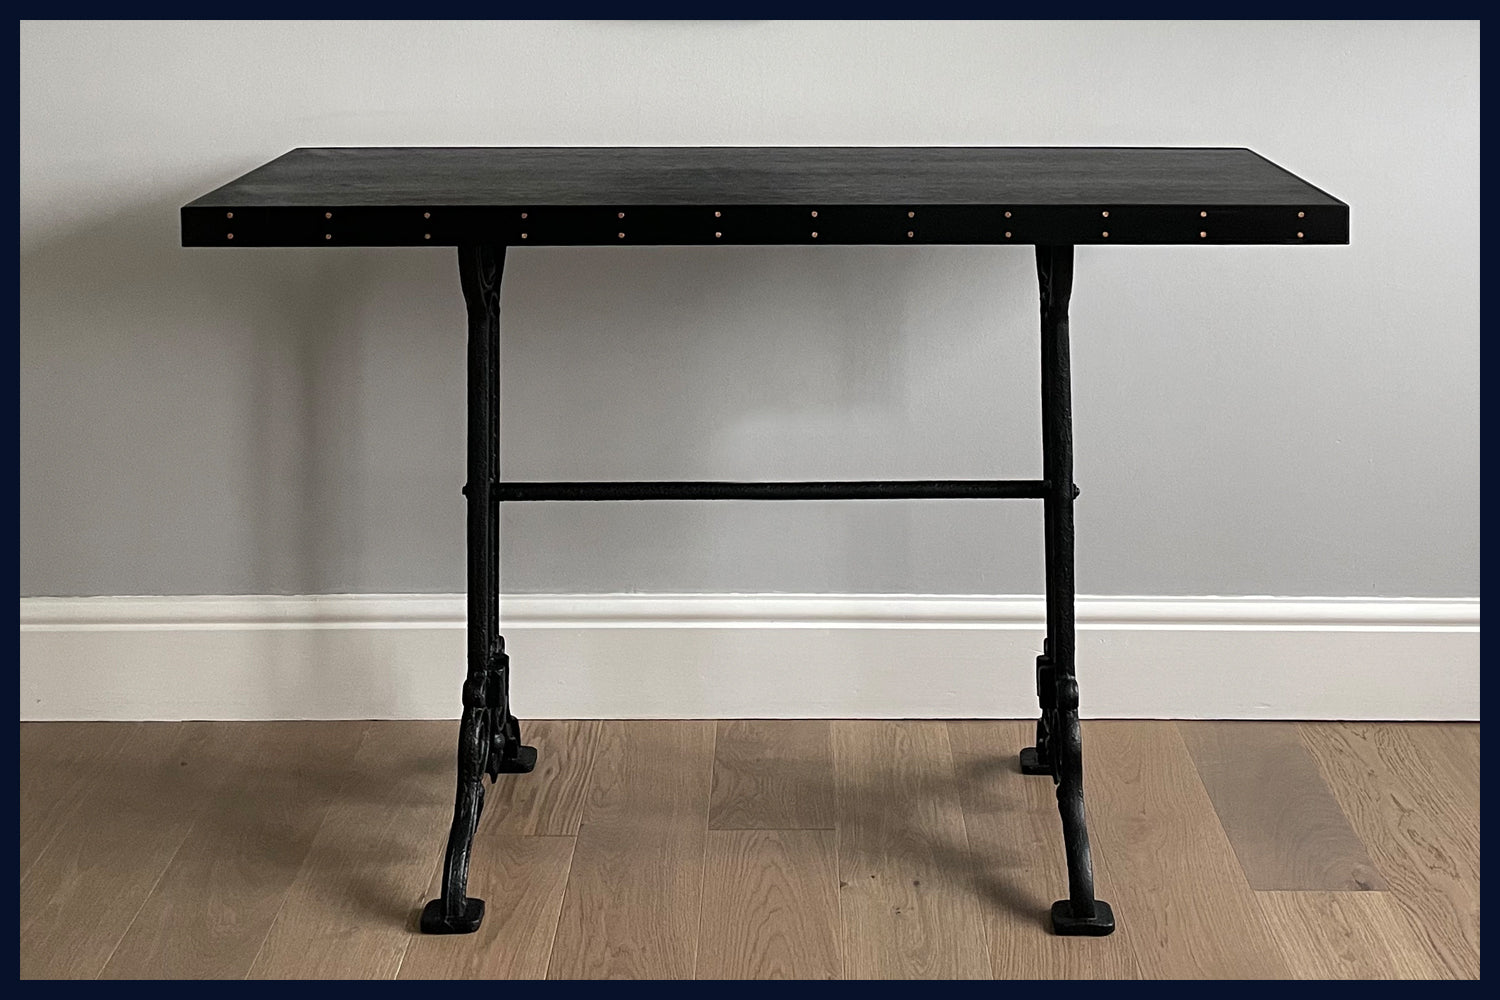 Wonderland Horizon Collection: Contemporary Console Table with Antique Base